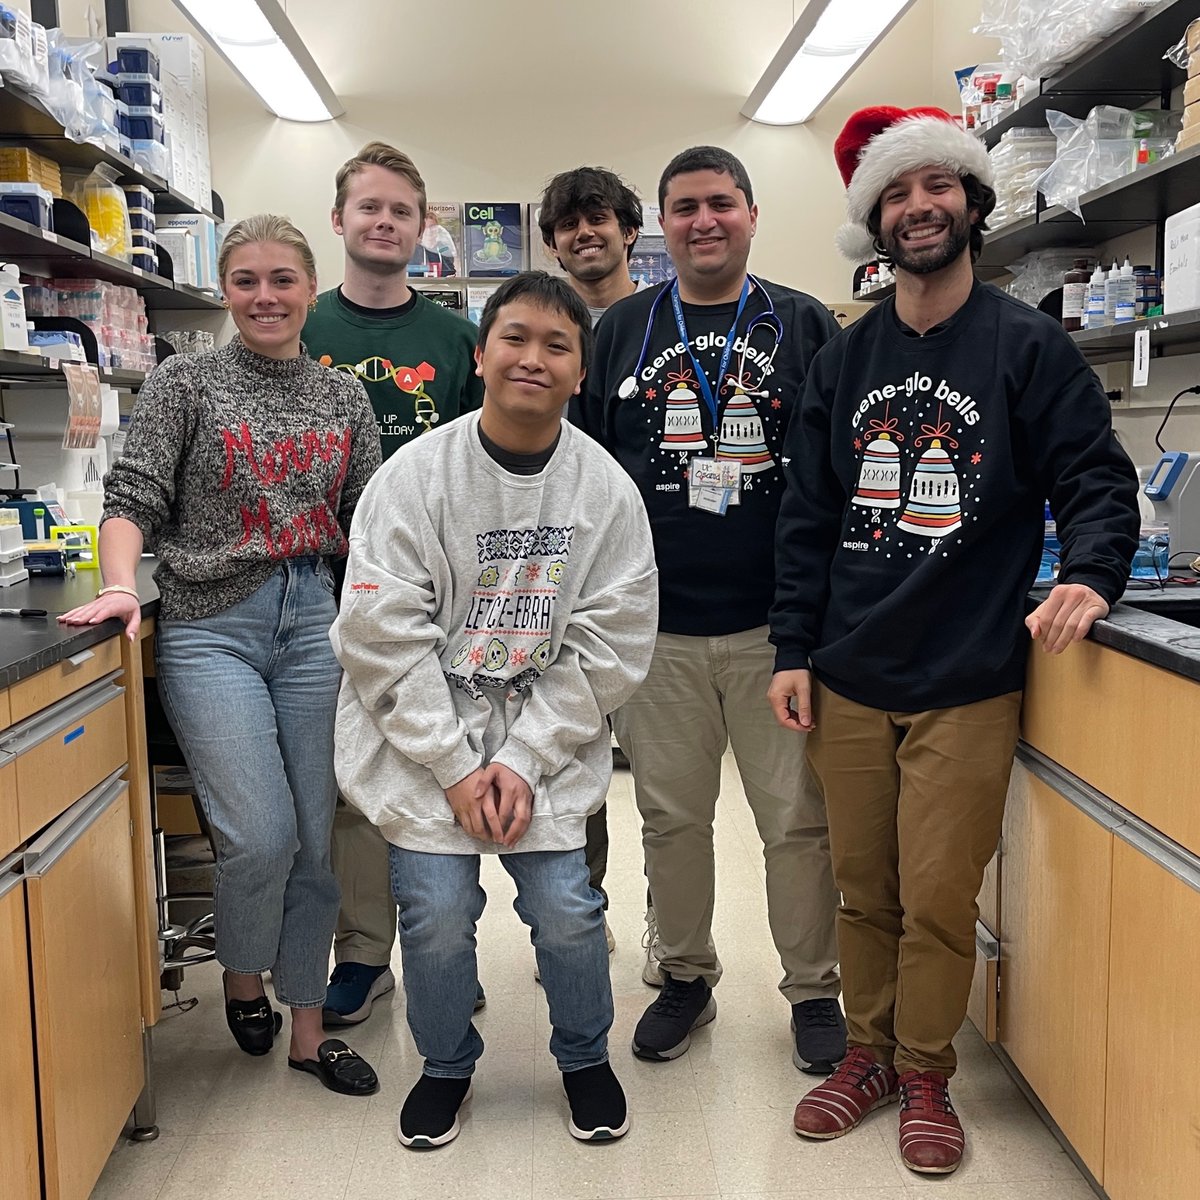 The Ferreira Lab wishes everyone a cheerful holiday season and an outstanding 2024. It will be a big year! #immunologymatters #changingwhatspossible @MUSChealth @muschollings